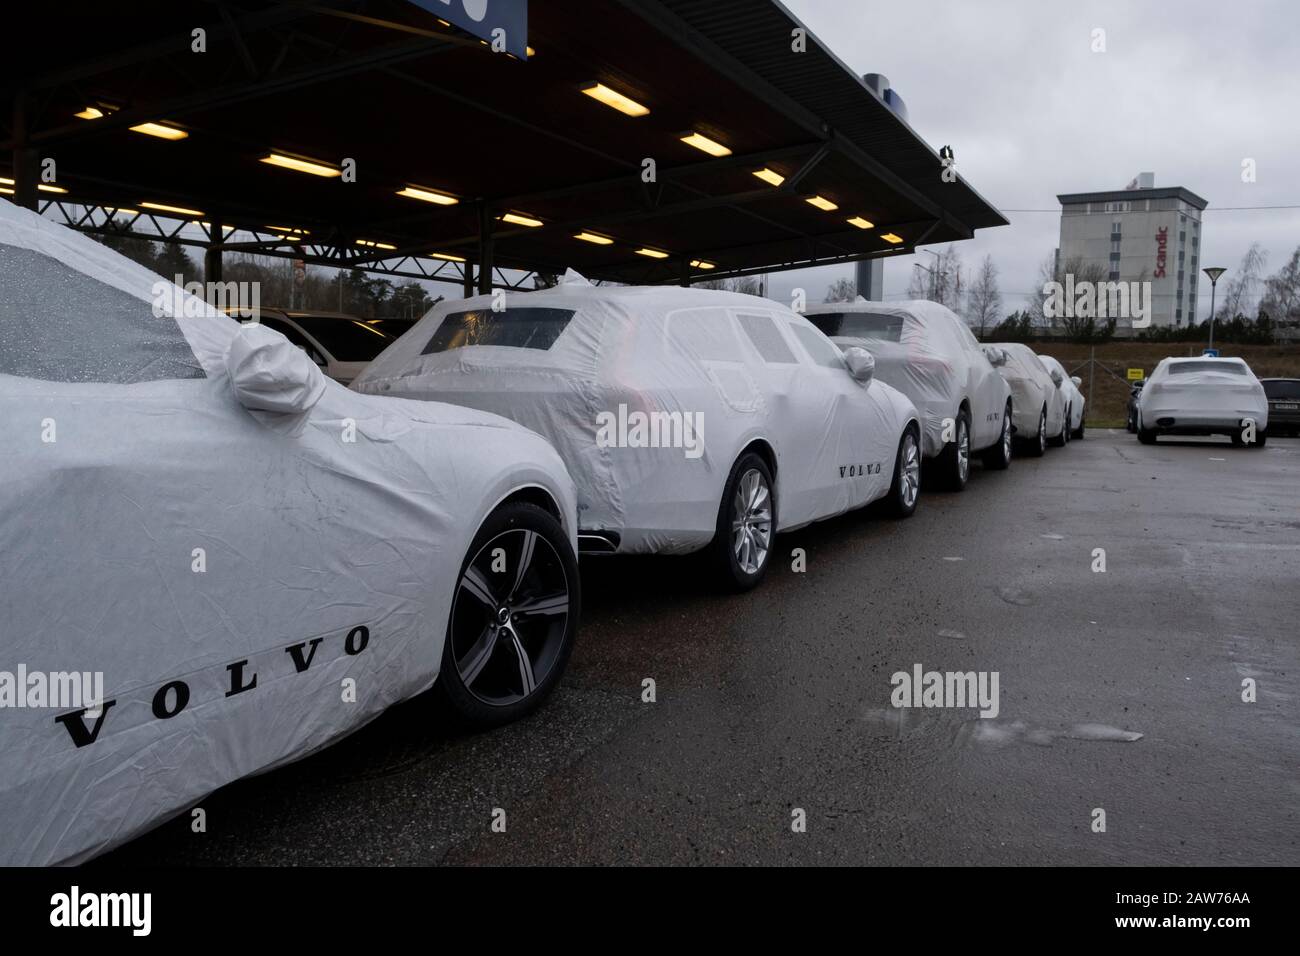 Delivery ready Volvo cars. Stock Photo